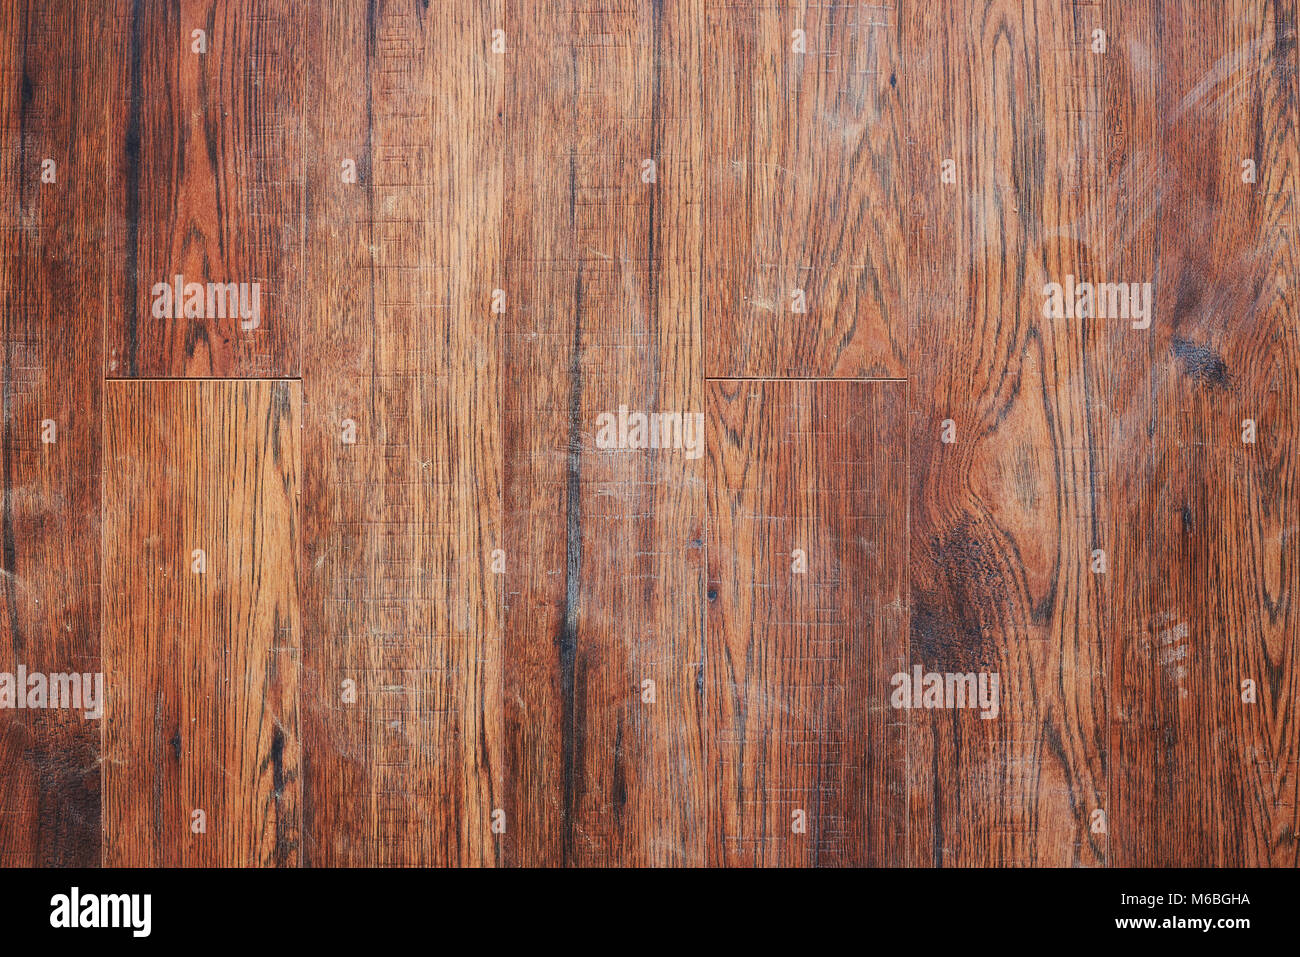 Dirty wooden floor. Brown wooden plank cover with dust Stock Photo